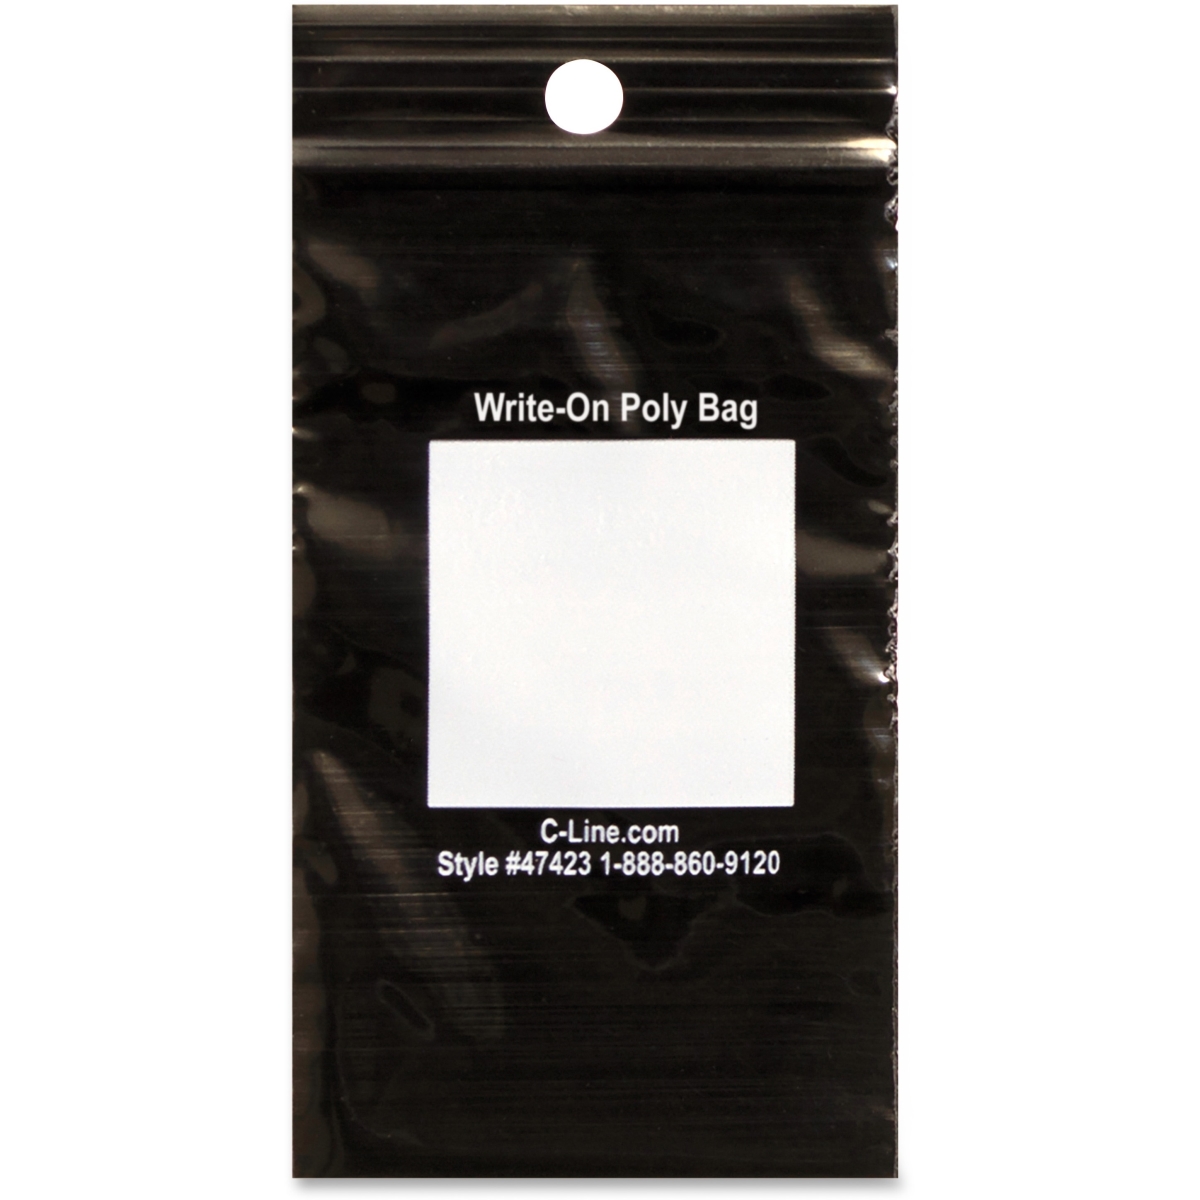 C-line Cli47423 2 X 3 In. Write-on Poly Bags With Zip - Black, 1000 Count